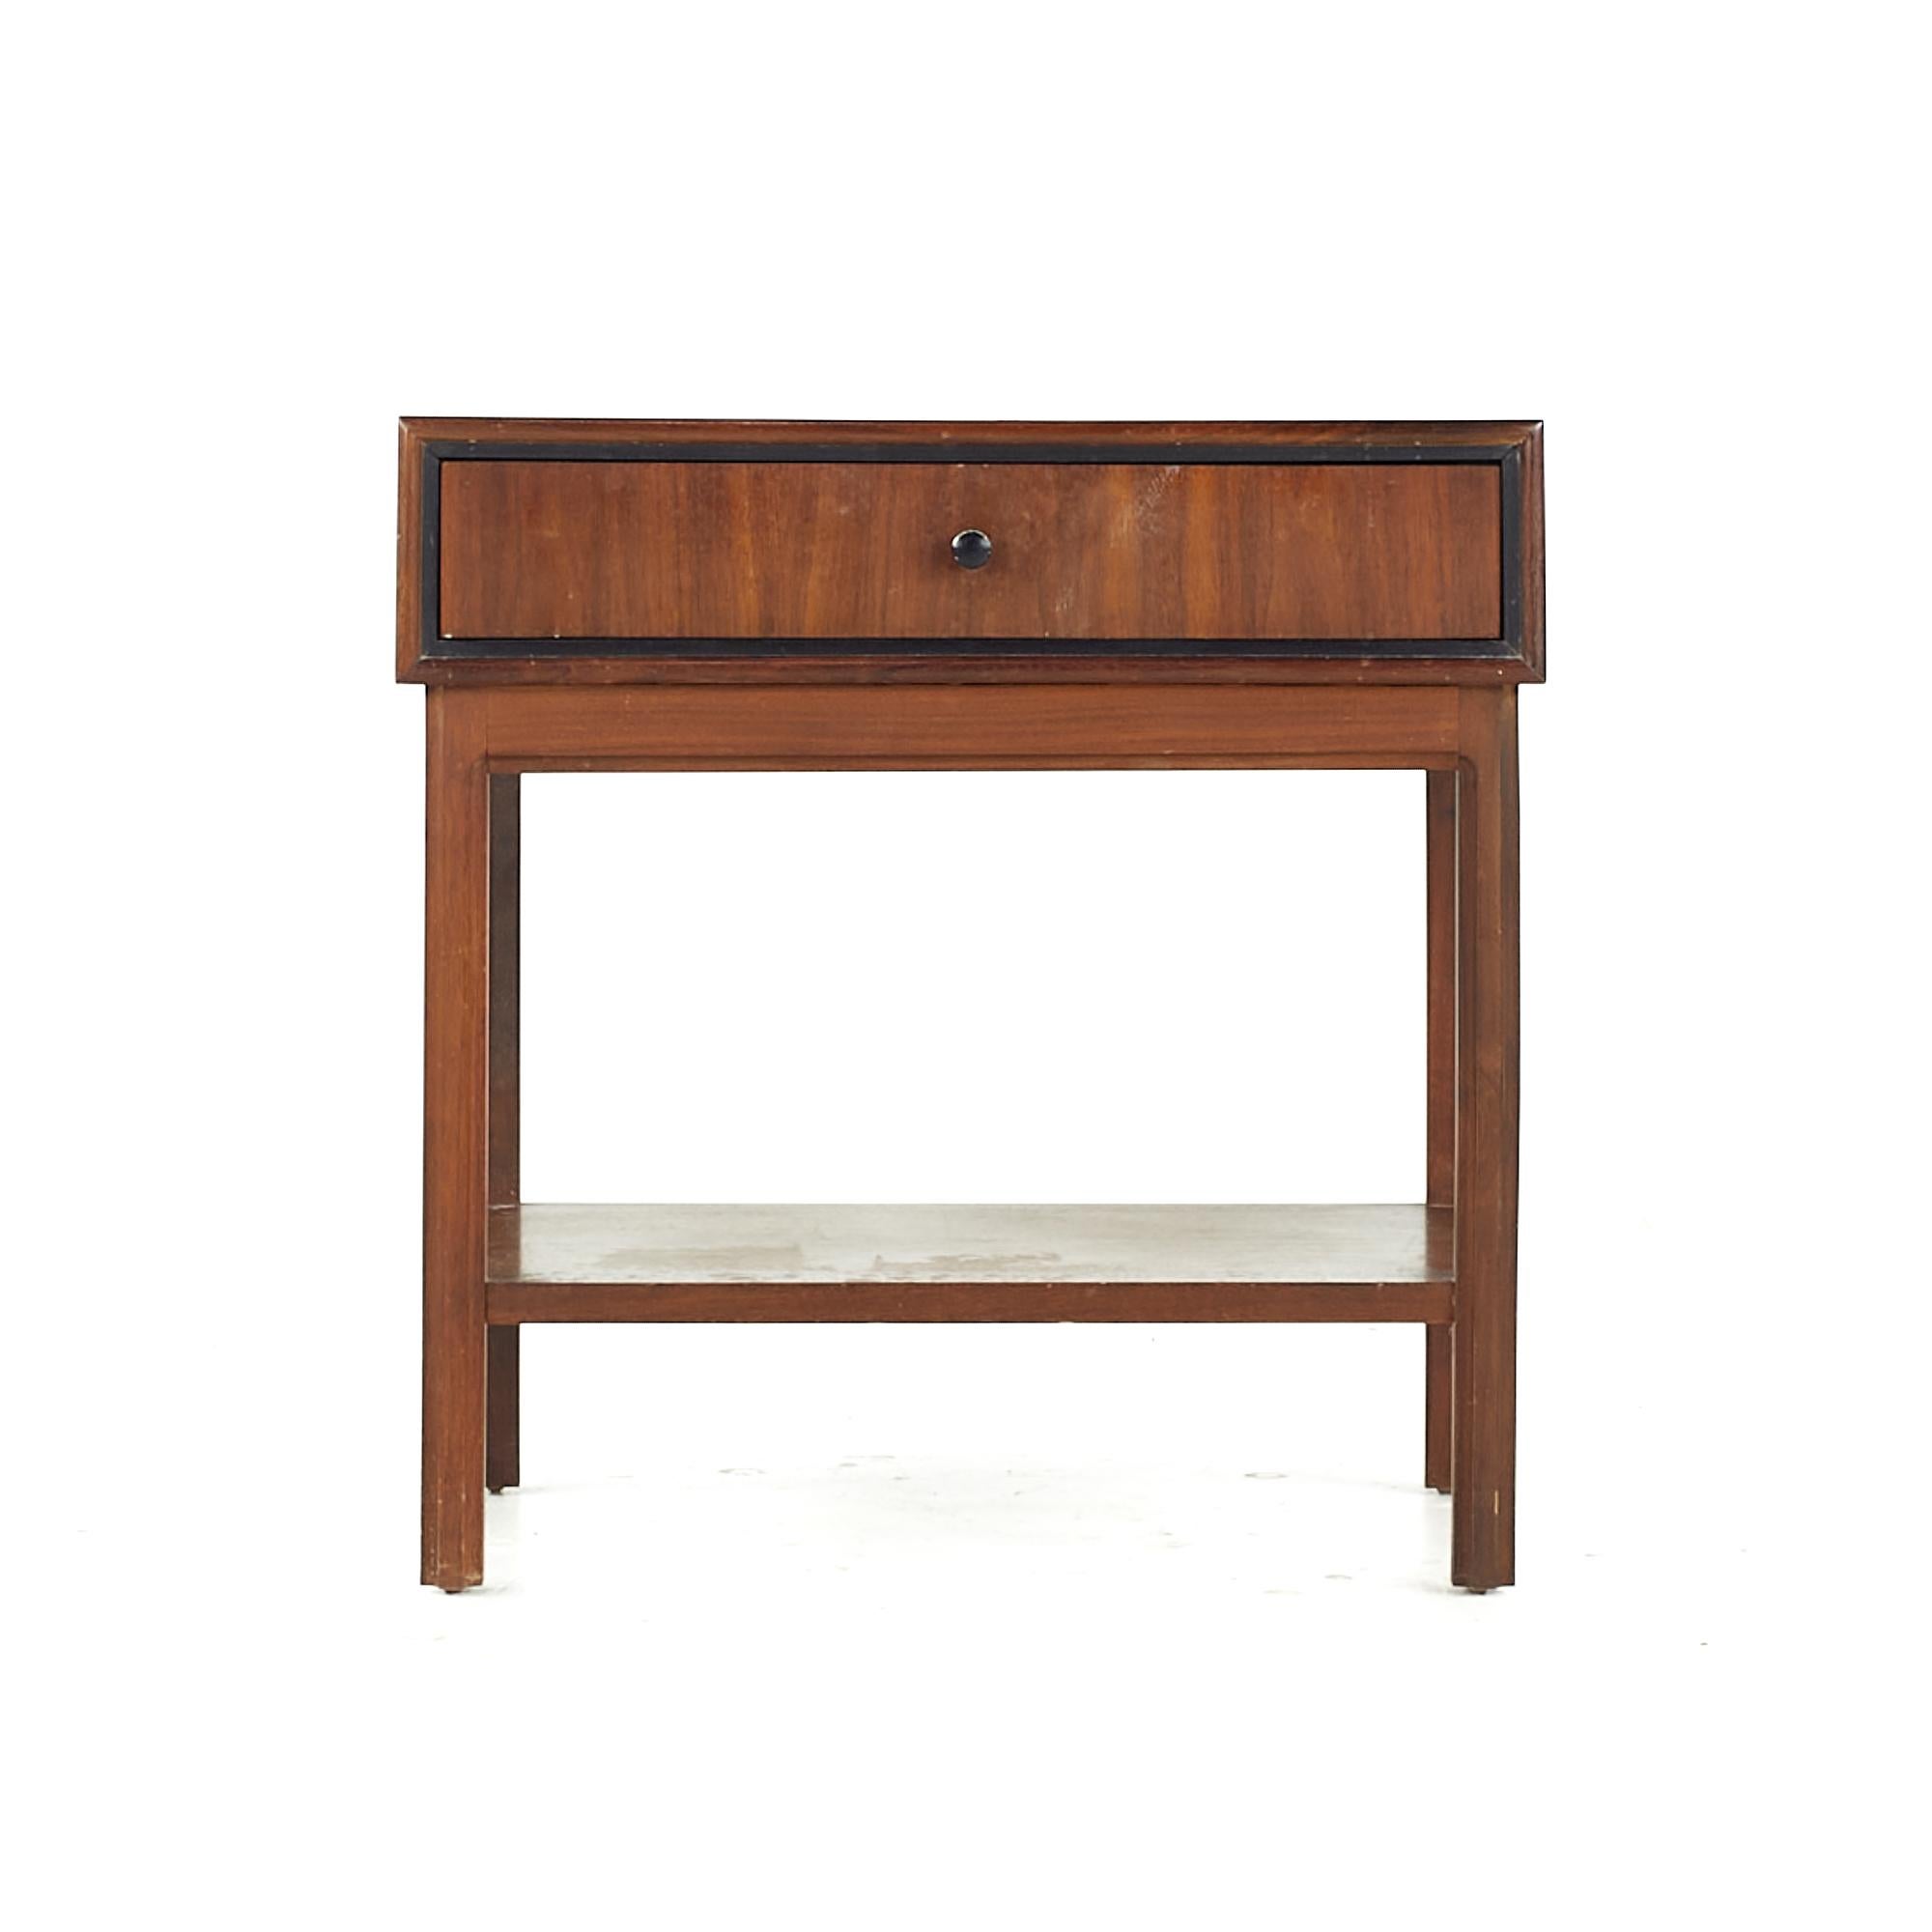 Jack Cartwright for Founders midcentury Walnut Nightstand

This nightstand measures: 22 wide x 16 deep x 22.75 inches high

All pieces of furniture can be had in what we call restored vintage condition. That means the piece is restored upon